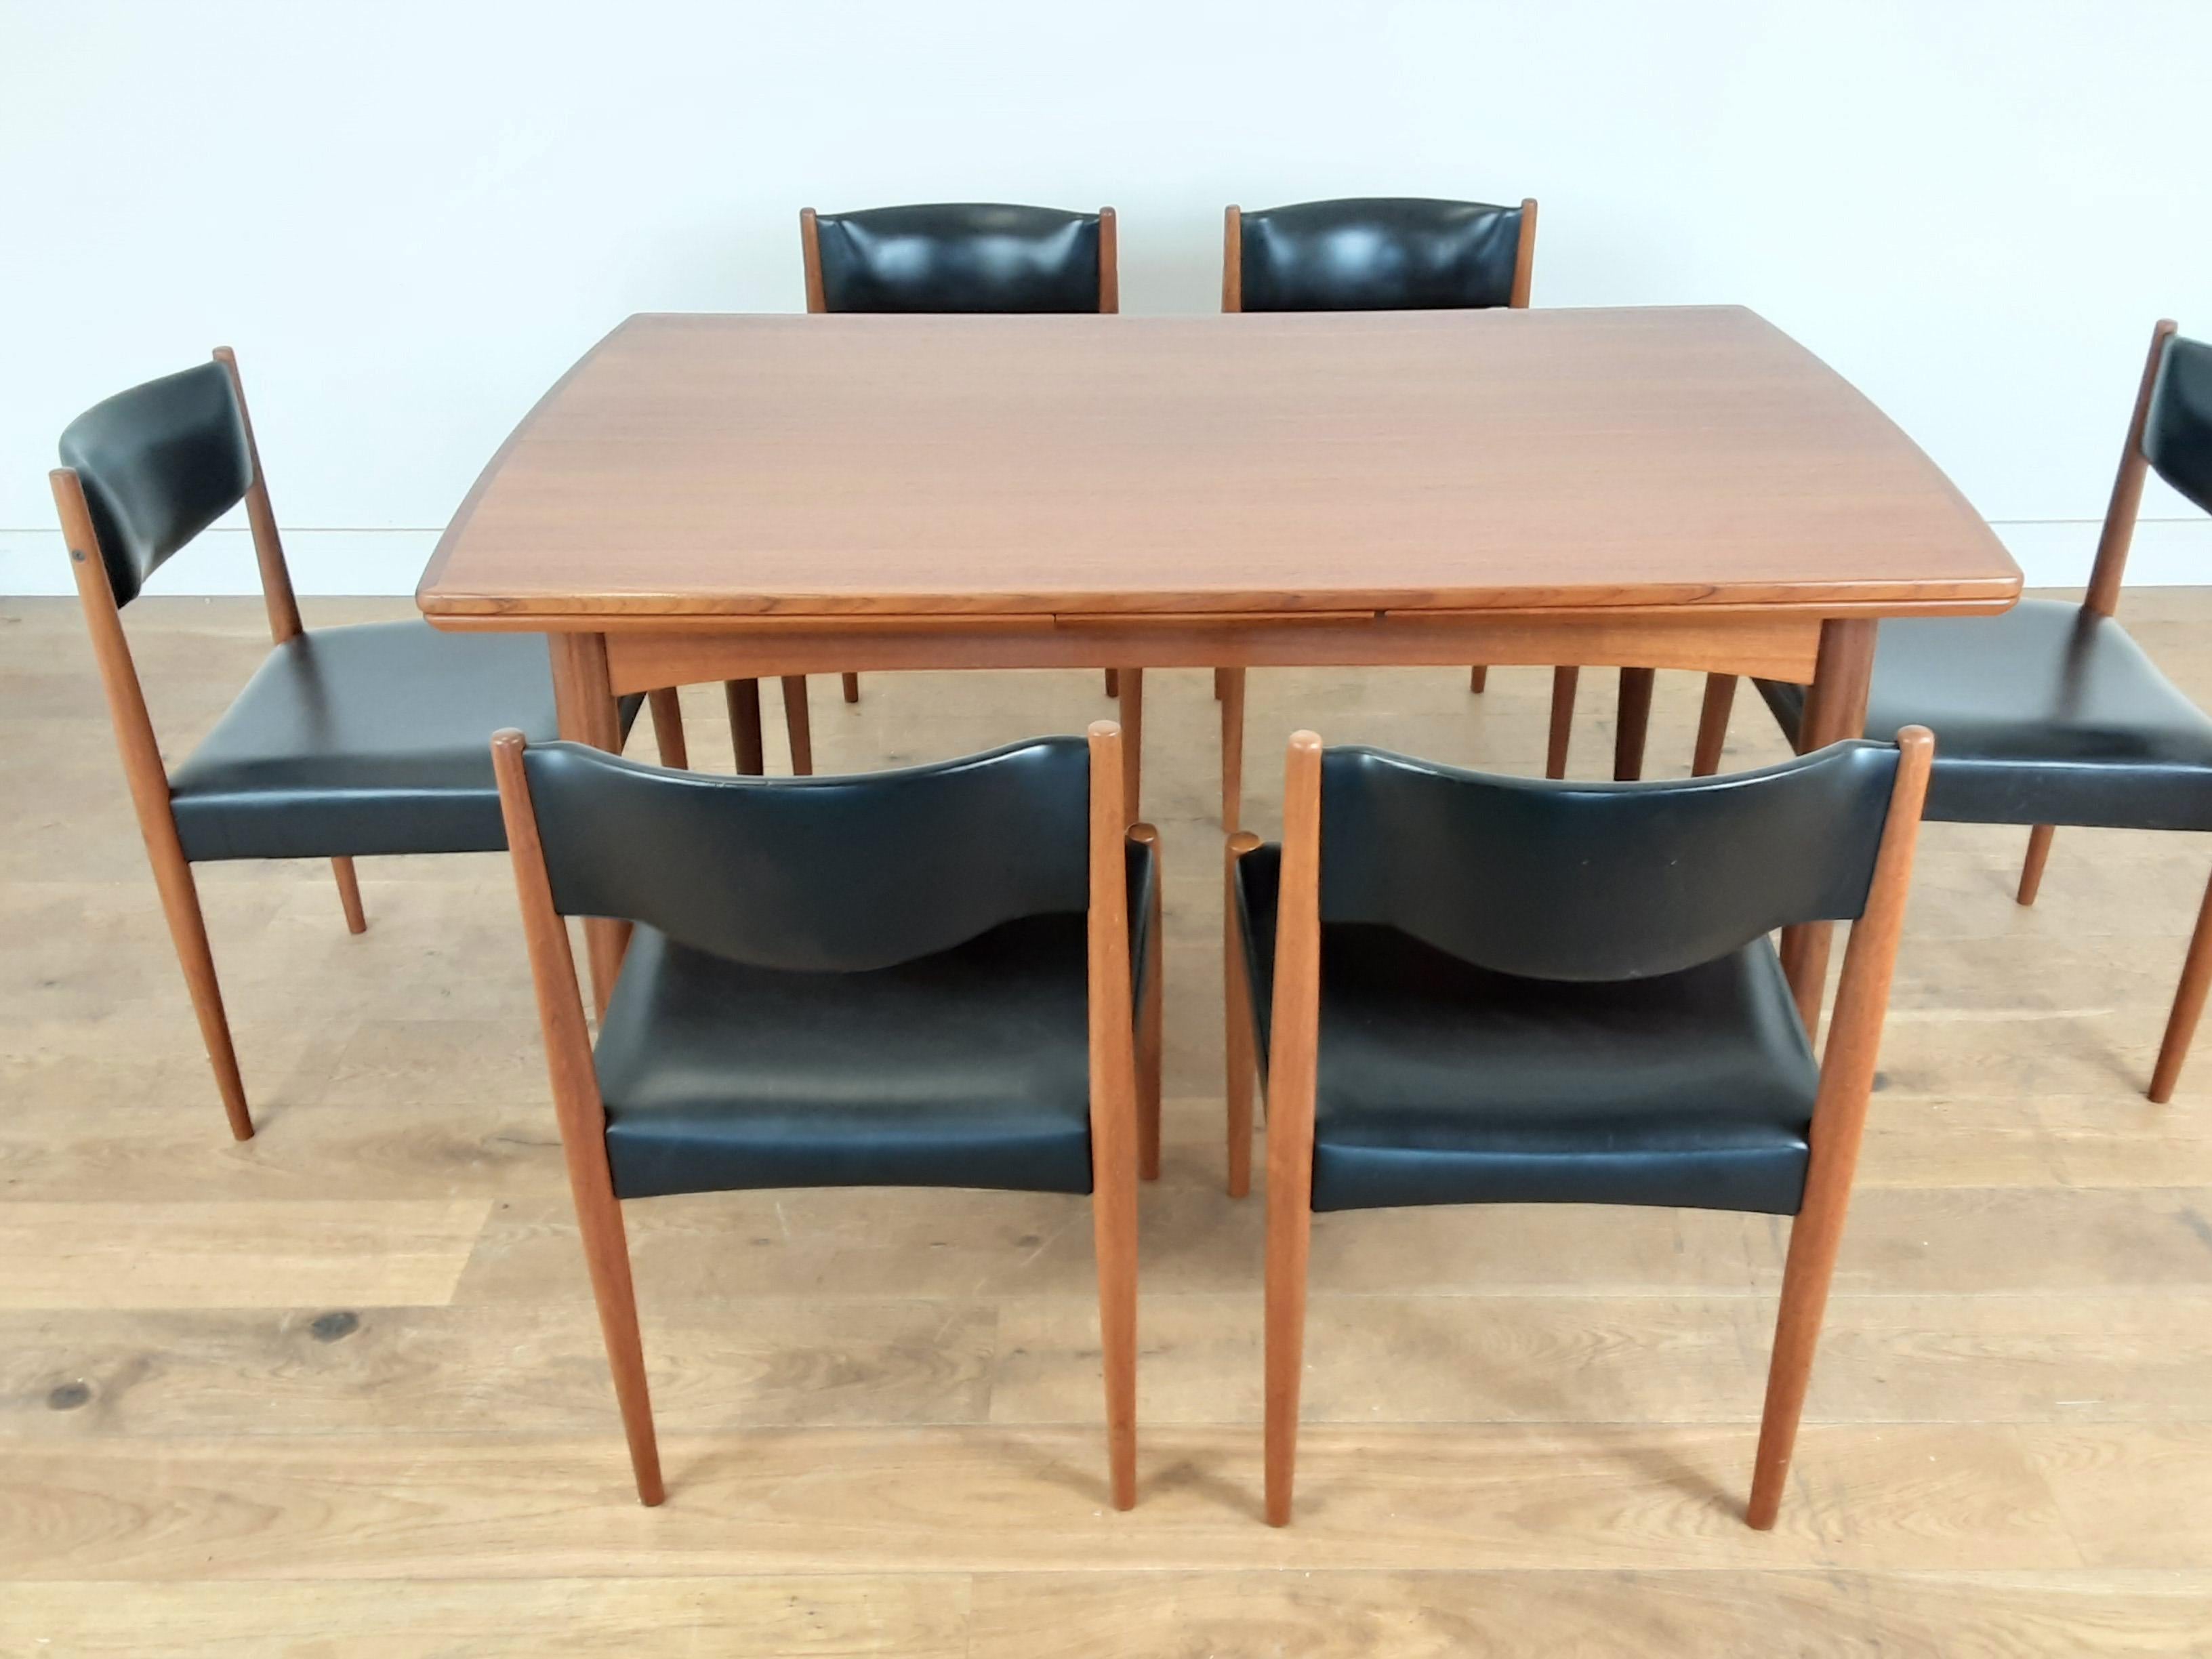 Midcentury dining table and chairs.
extendable dining table in golden teak wood with a set of six turned teak wood chairs upholstered in a black vinyl.
Danish, circa 1960.
Measures: Table 257 cm fully extended, each leaf is 55 cm, 72.5 cm H, 146